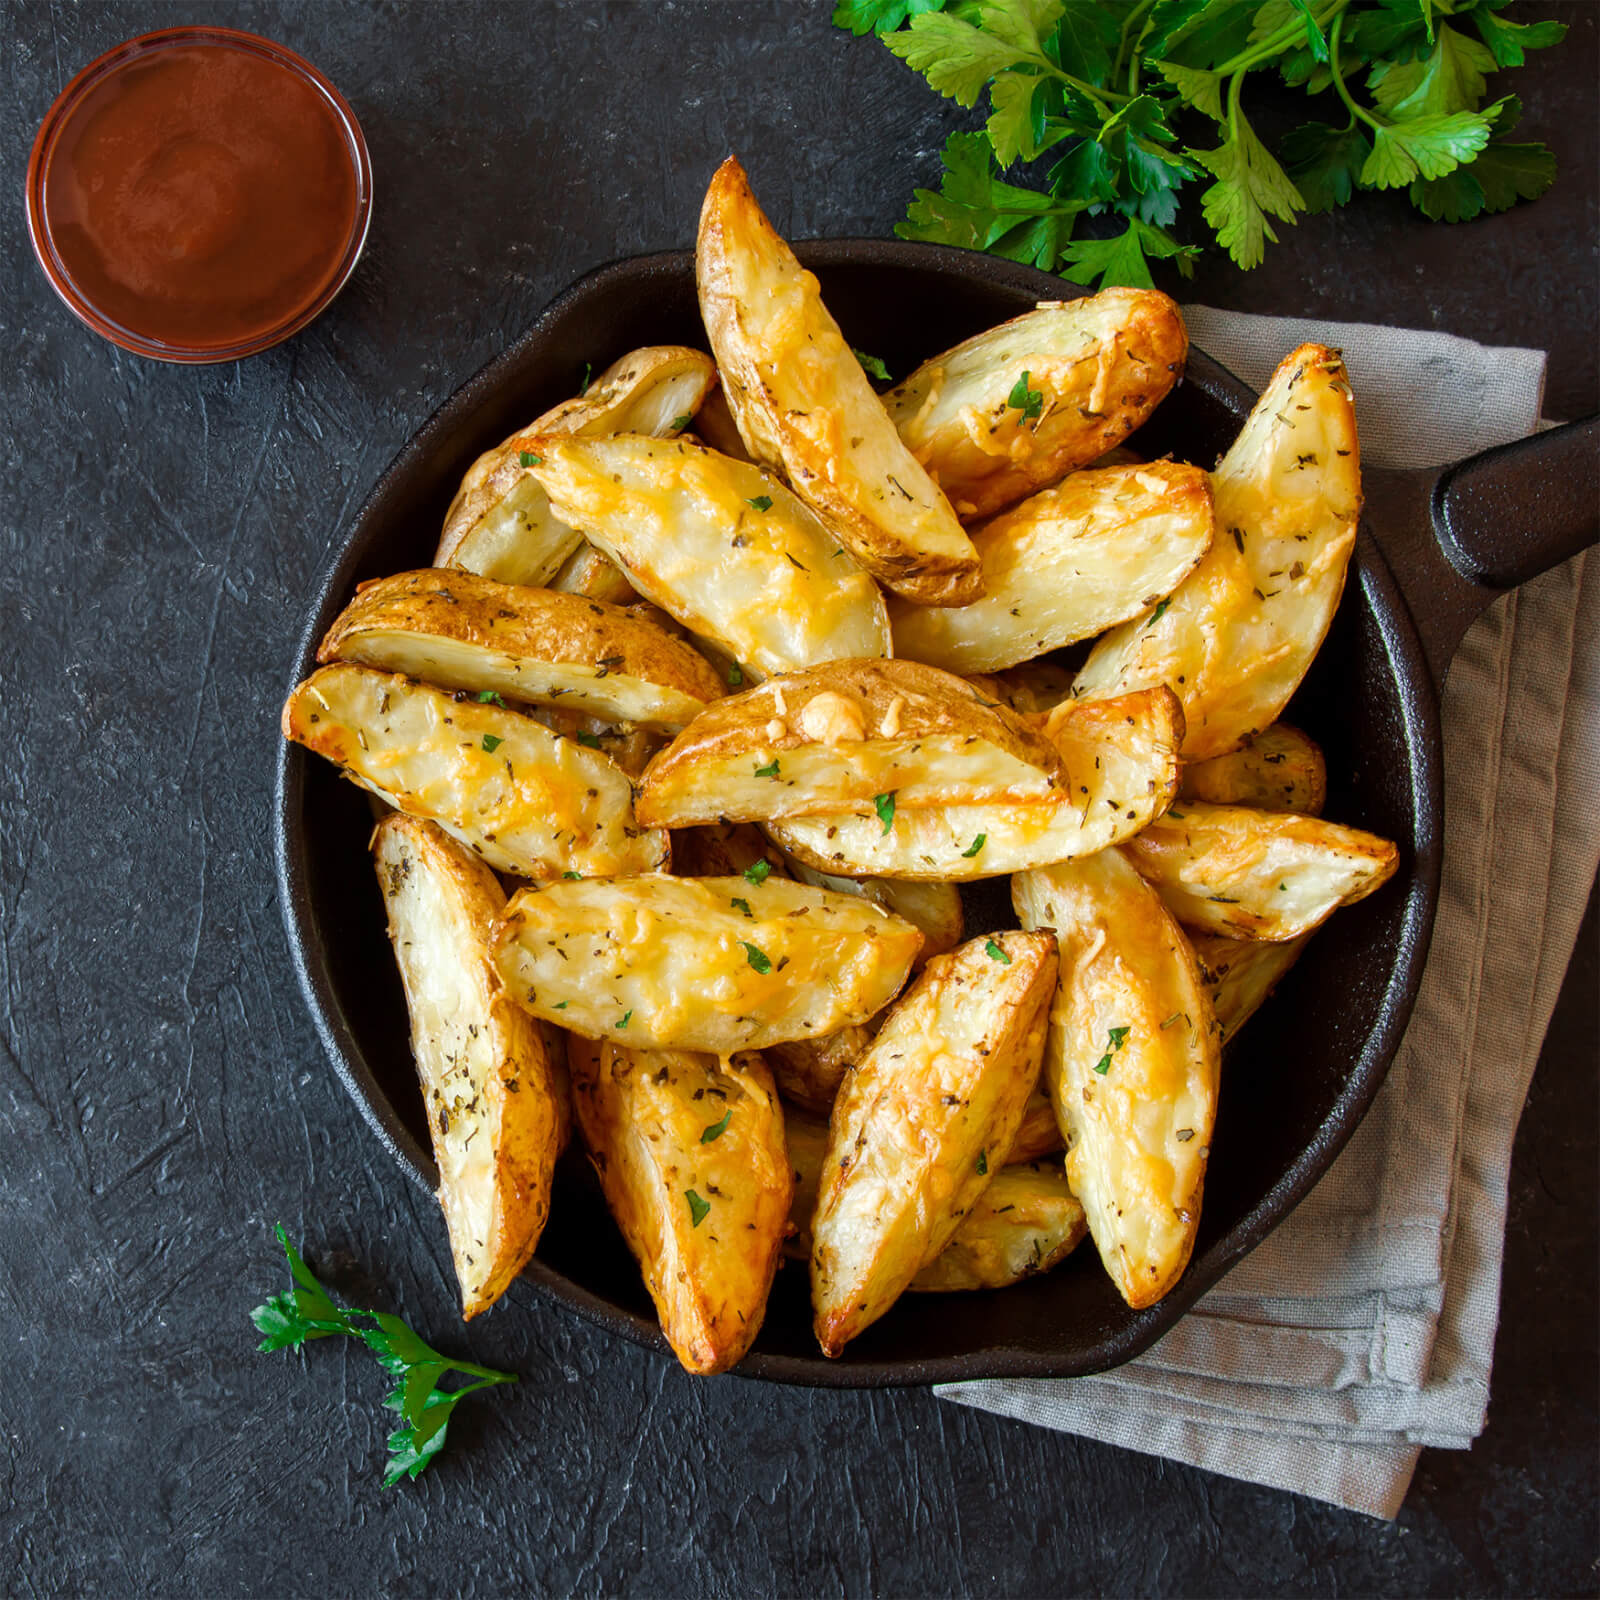 Snack It Up This Holiday Season with Indian Inspired Potato Wedges by KFI Sauces